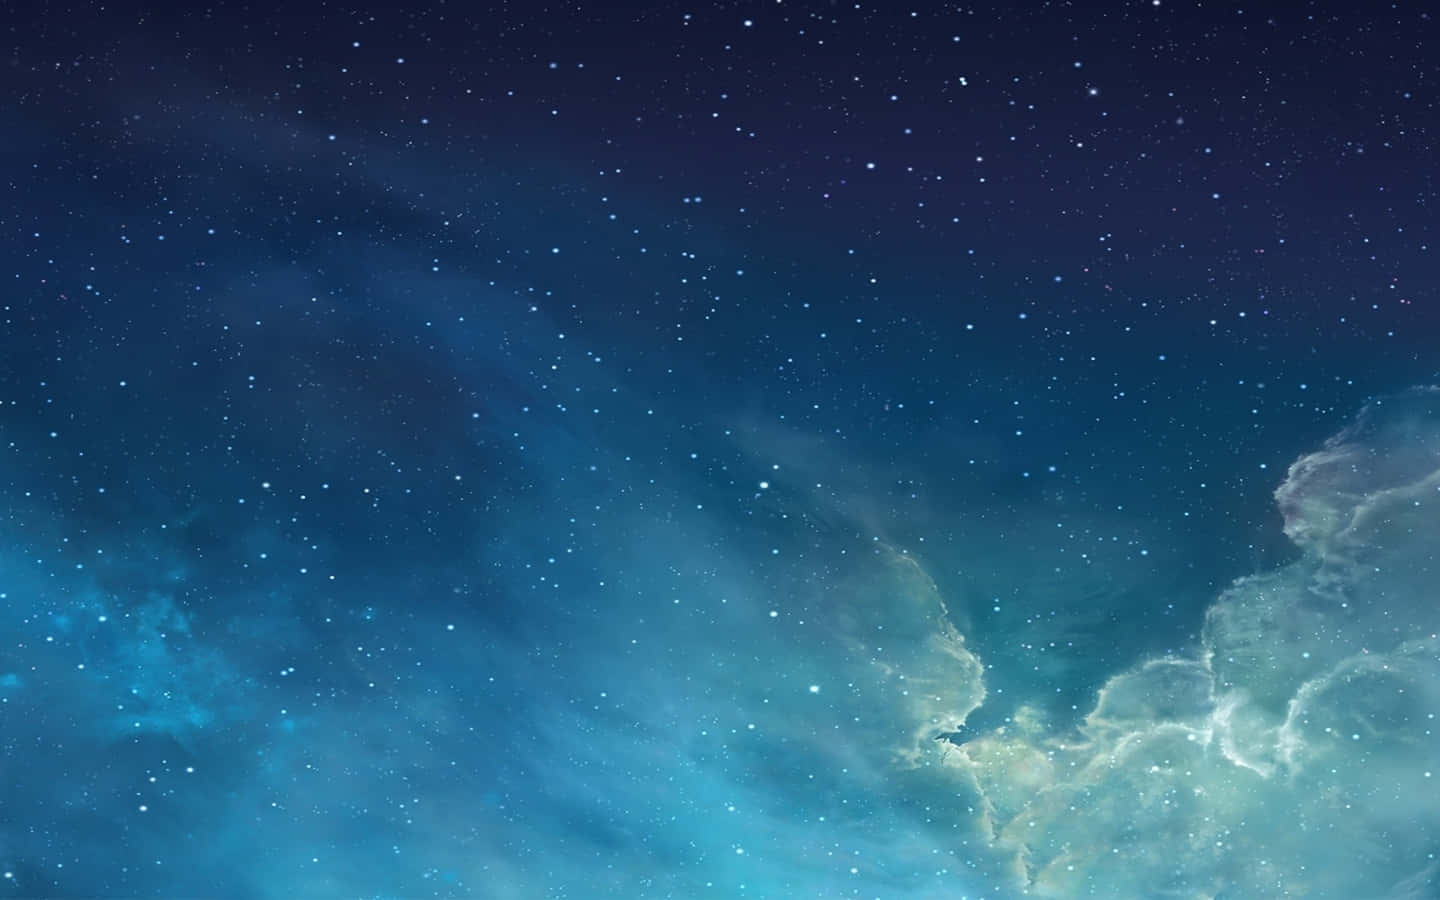 An Image Of An Iphone With A Blue Sky And Stars Wallpaper